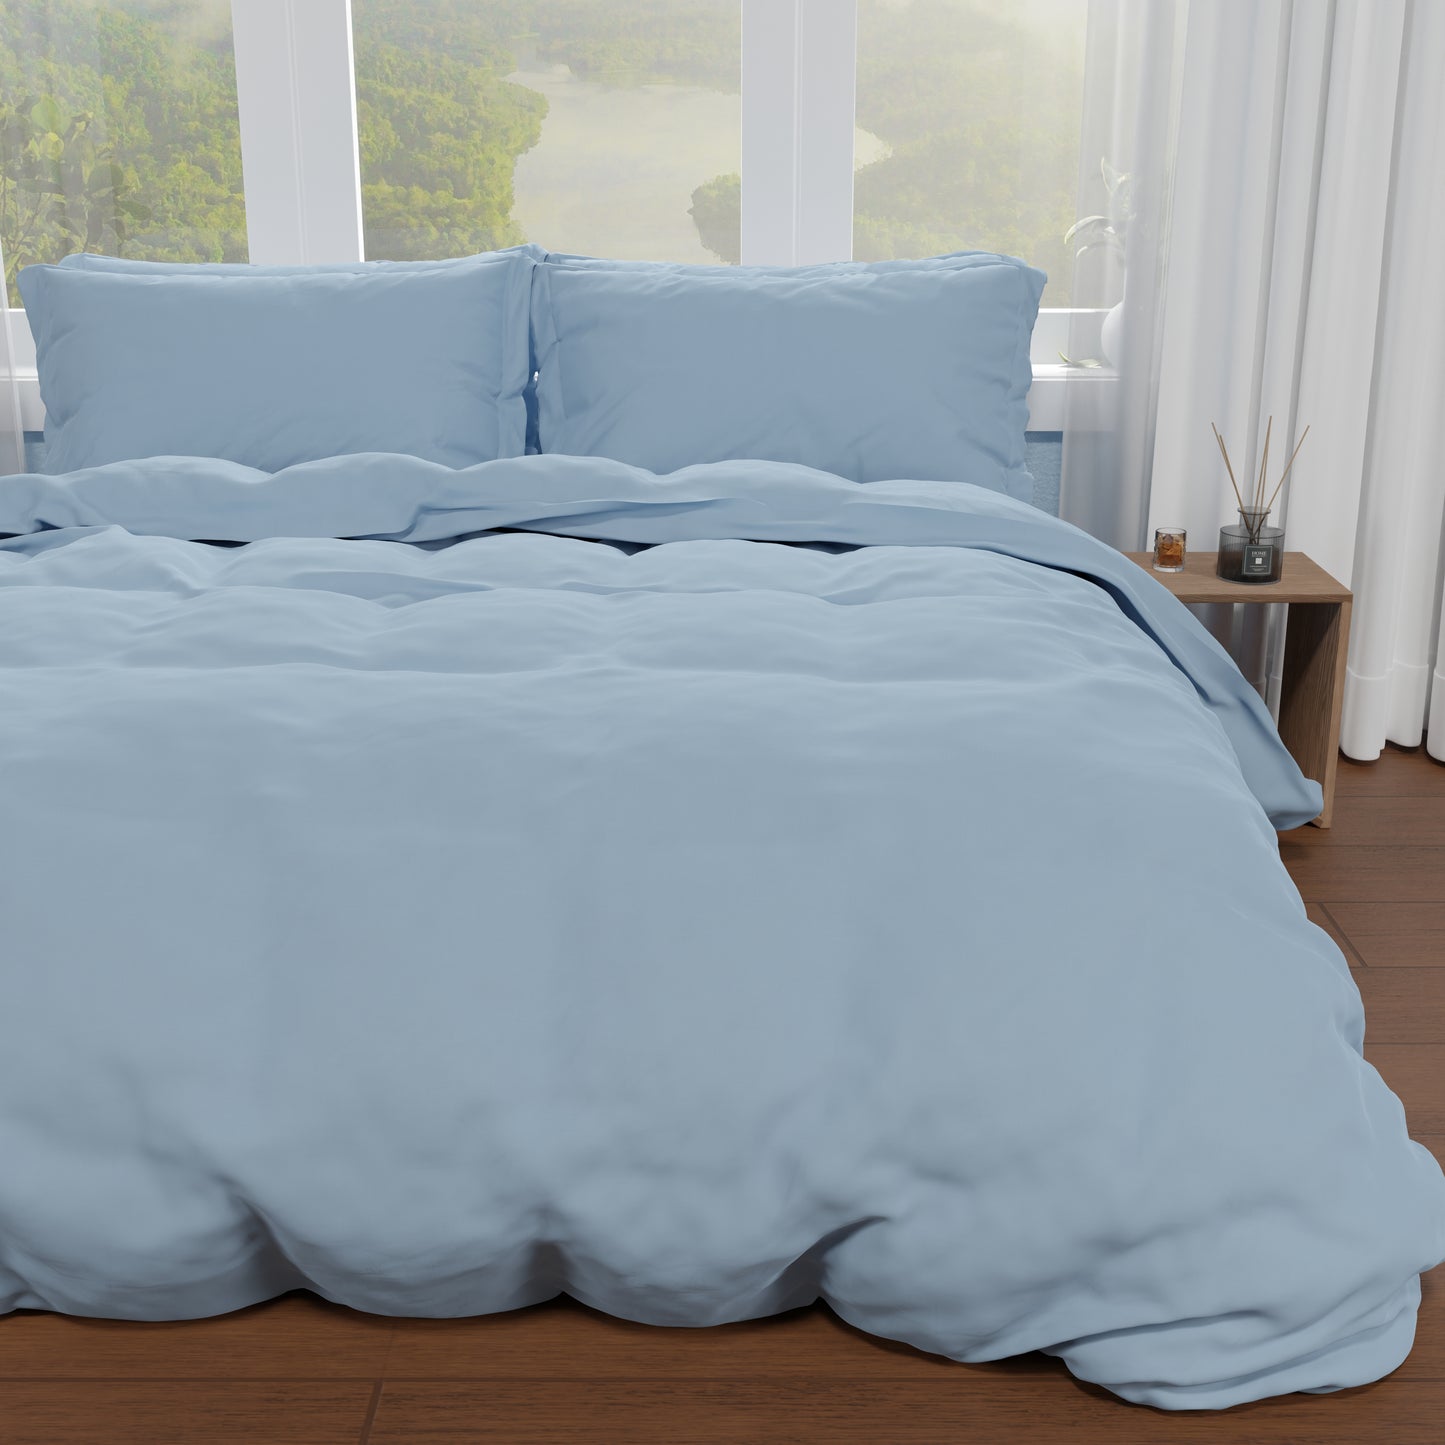 Double Duvet Cover, Duvet Cover and Pillowcases, Light Blue Solid Color